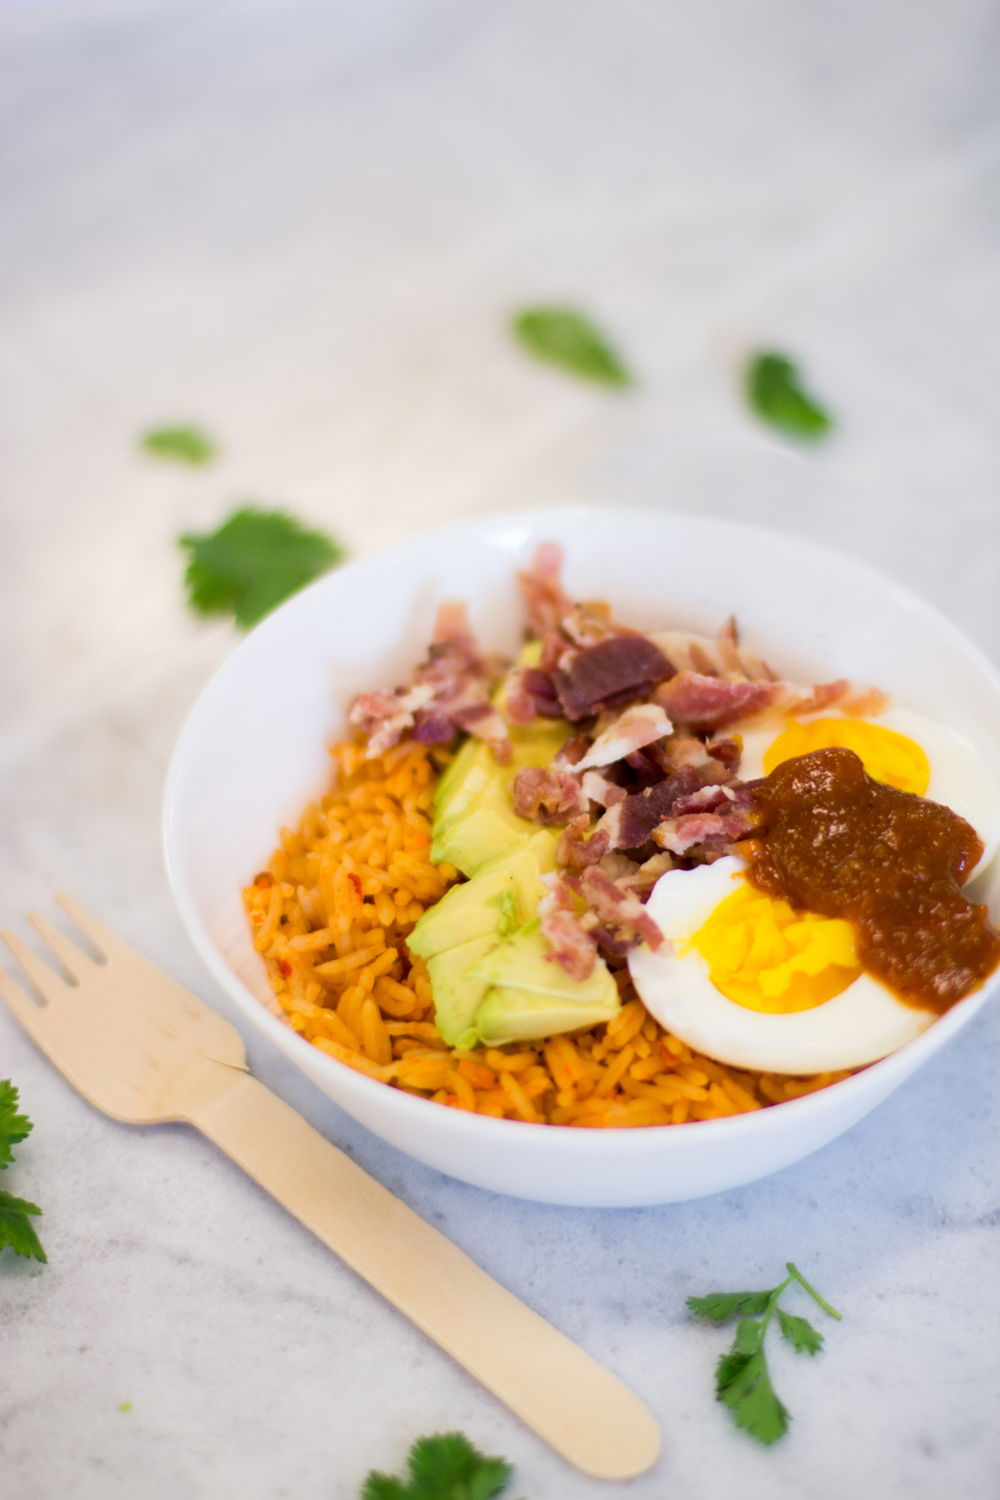 Chili and Lime for a Mexican breakfast/lunch with bacon, eggs and avocado - Tabasco at will